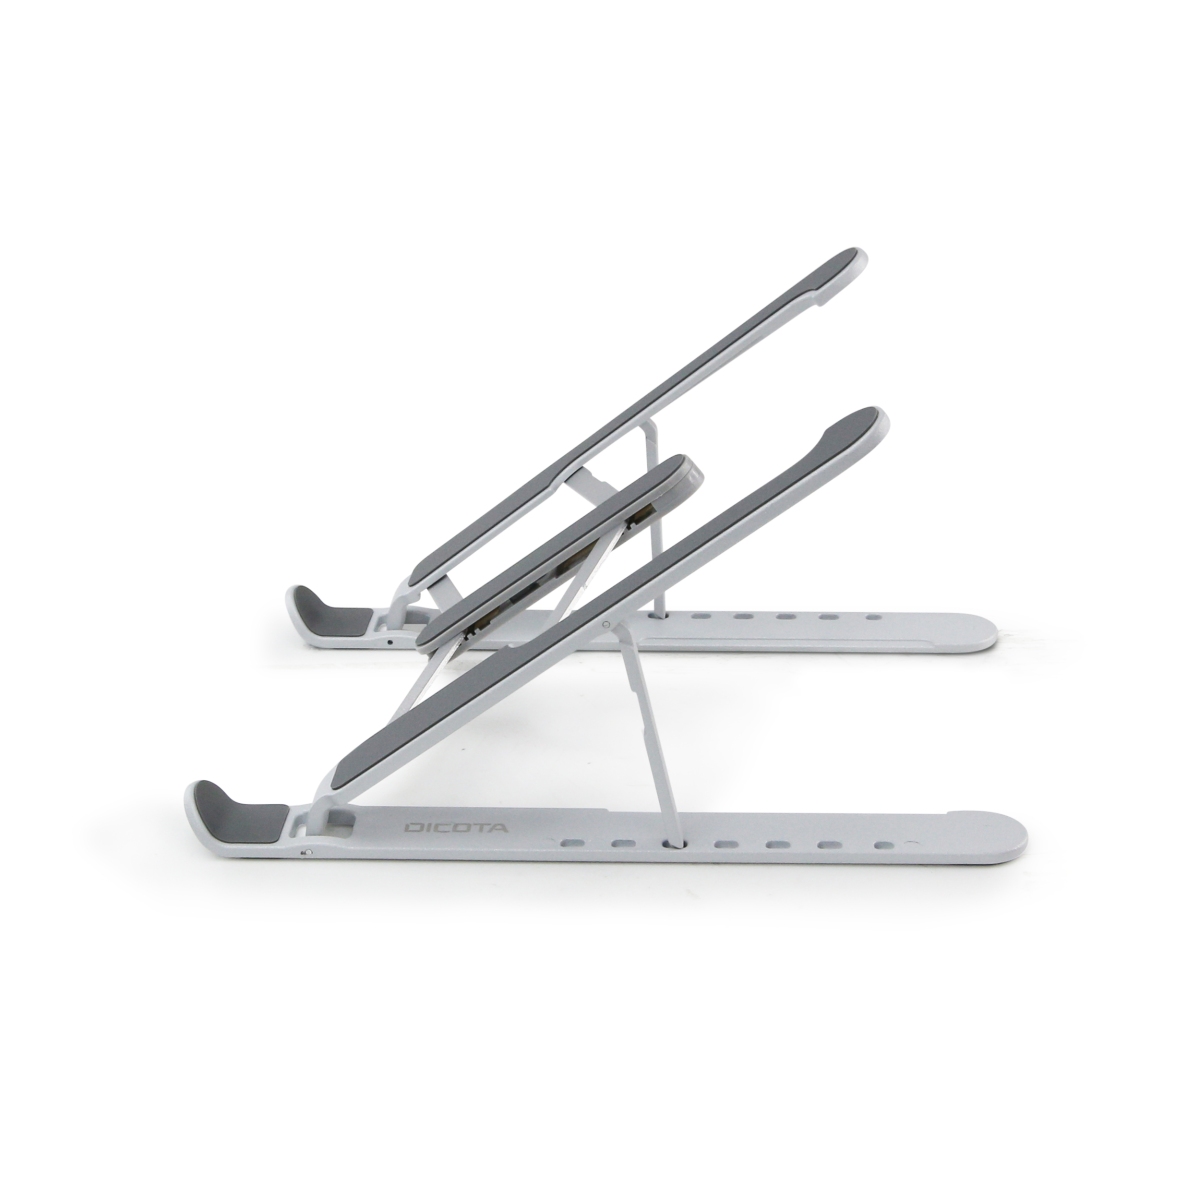 DICOTA Portable Laptop/ Tablet Stand 